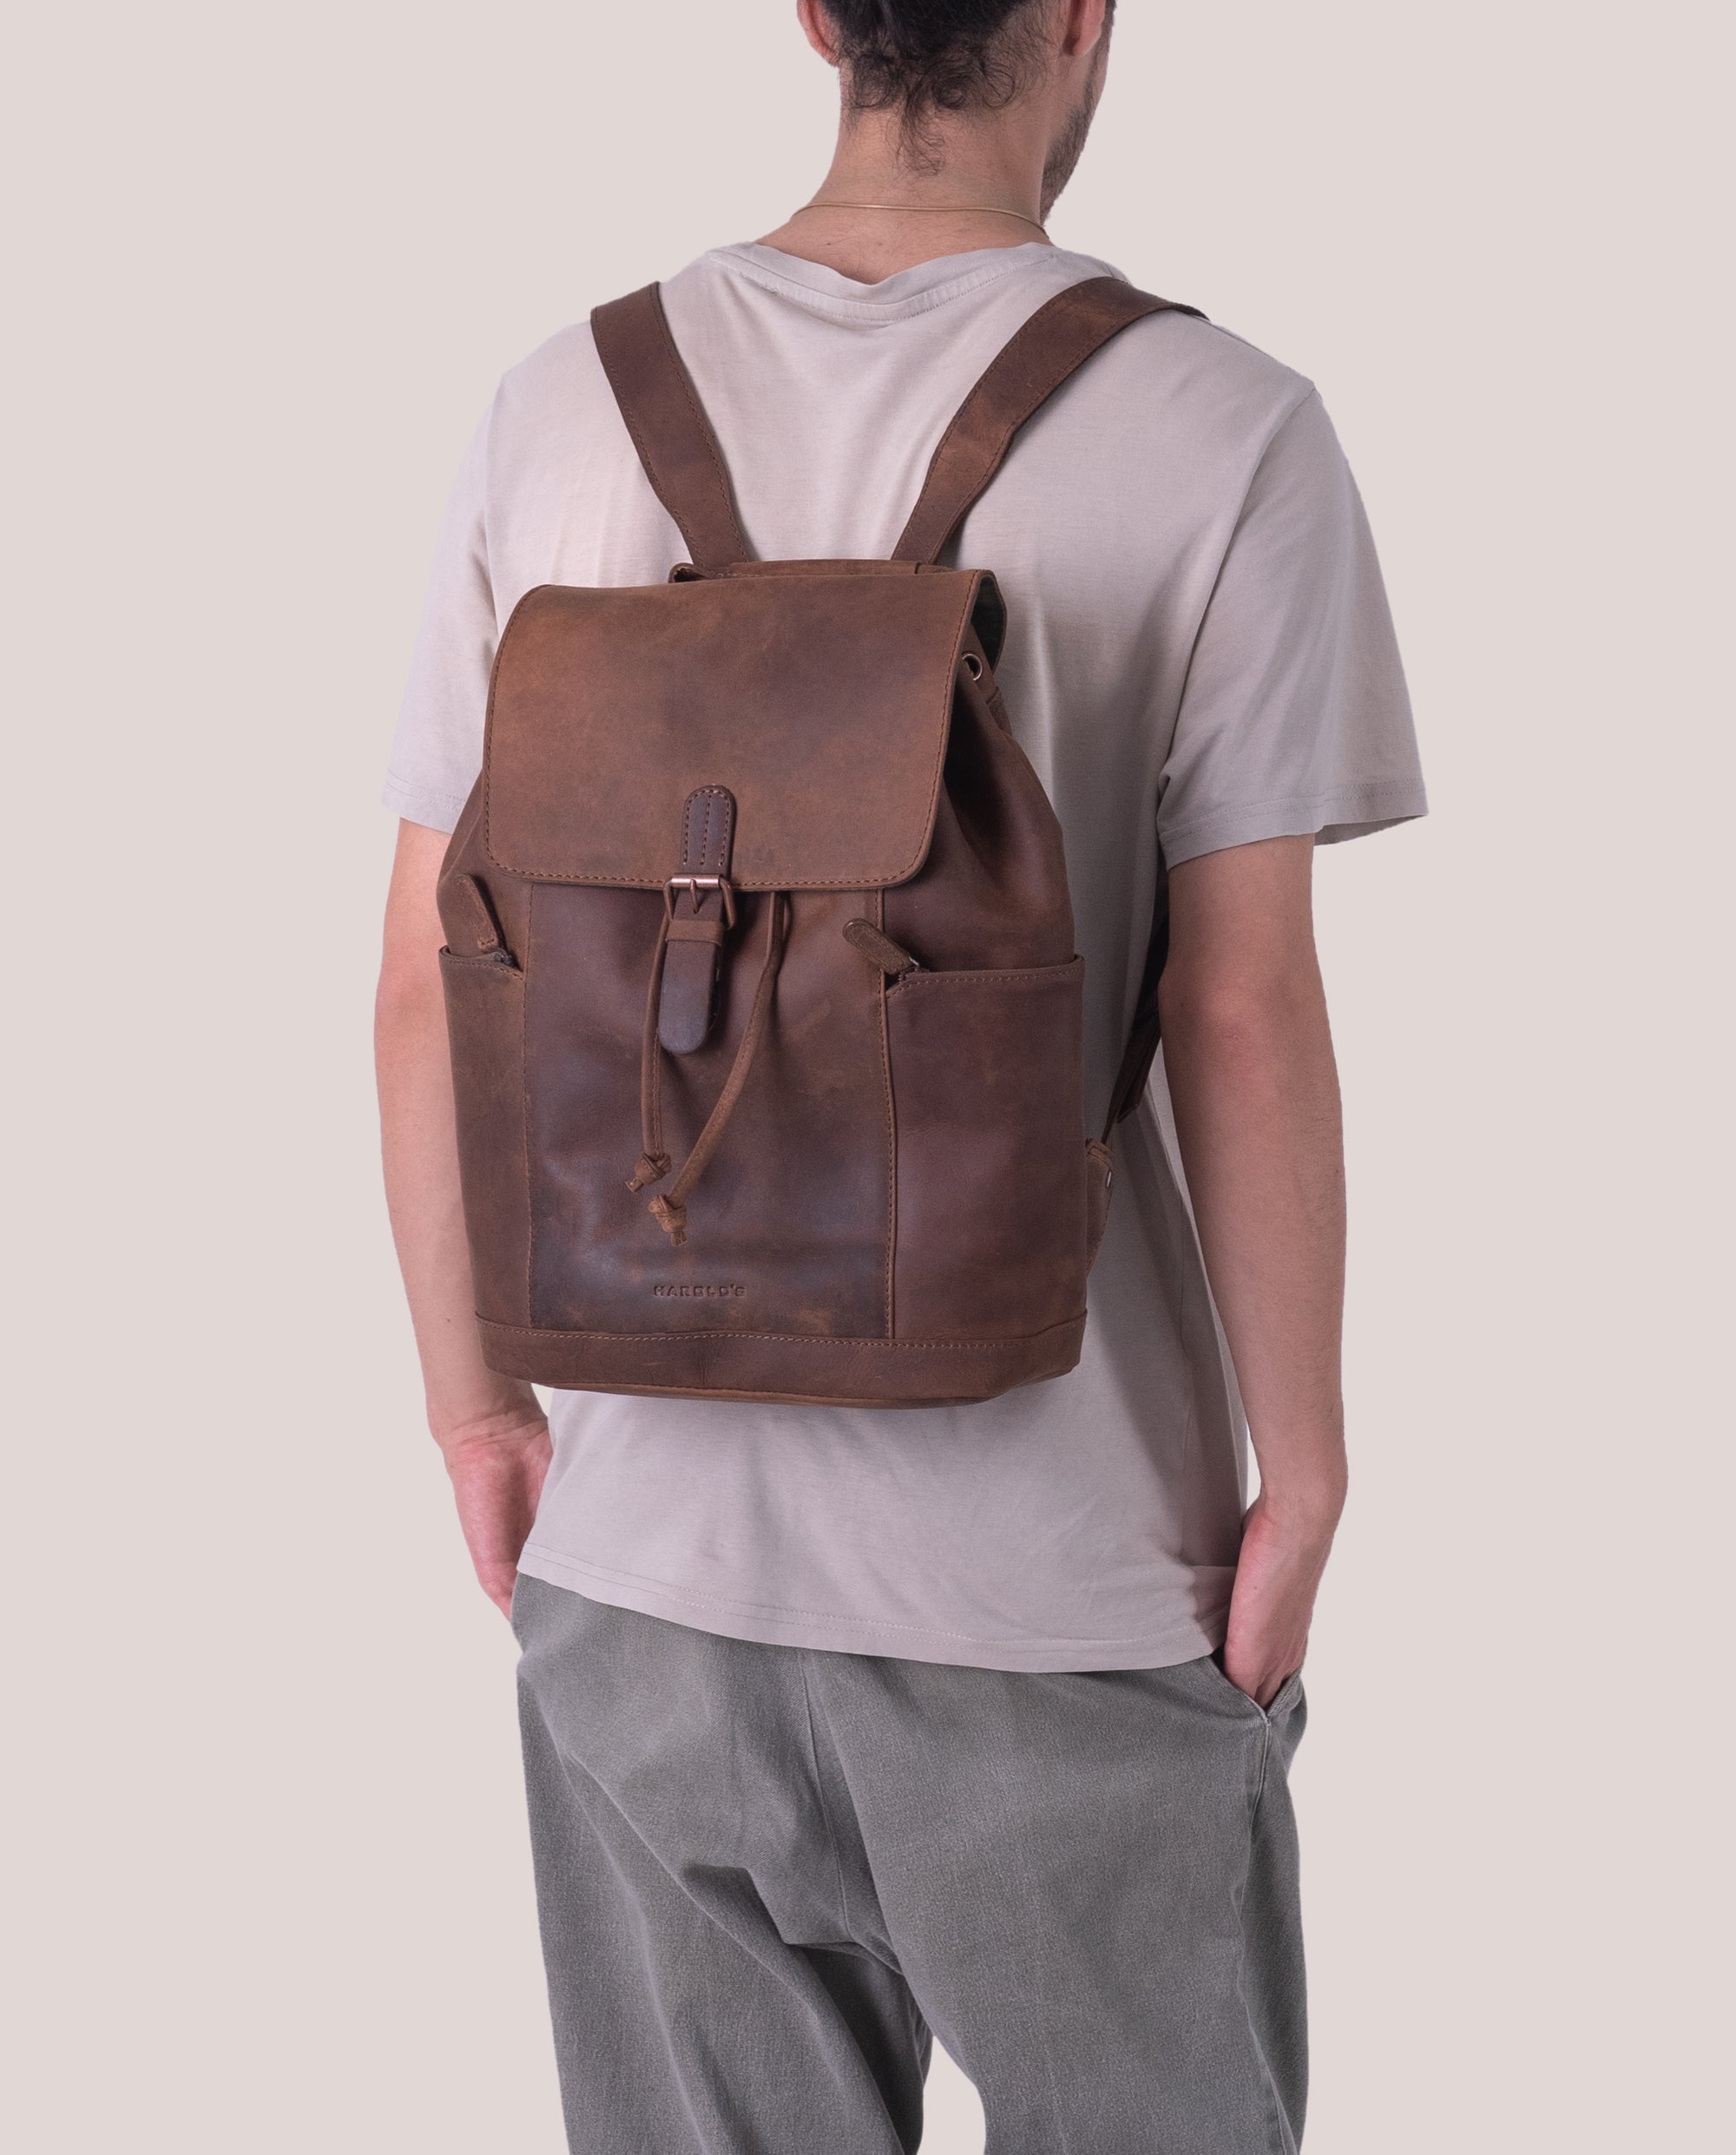 Antic heritage Backpack L